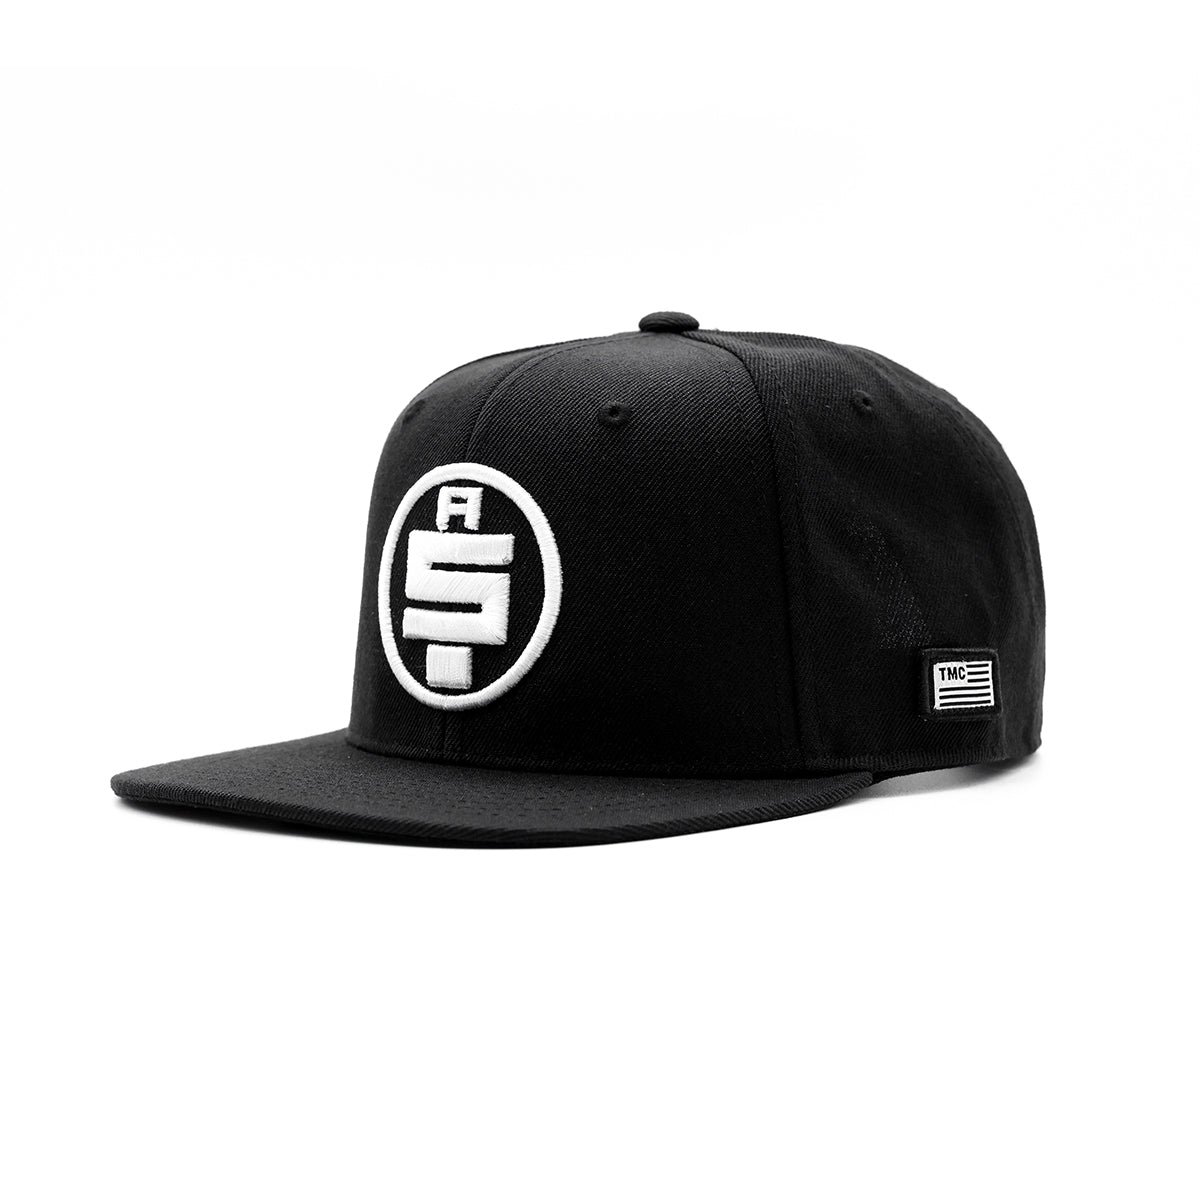 All Money In Limited Edition Snapback - Black/White - Angle